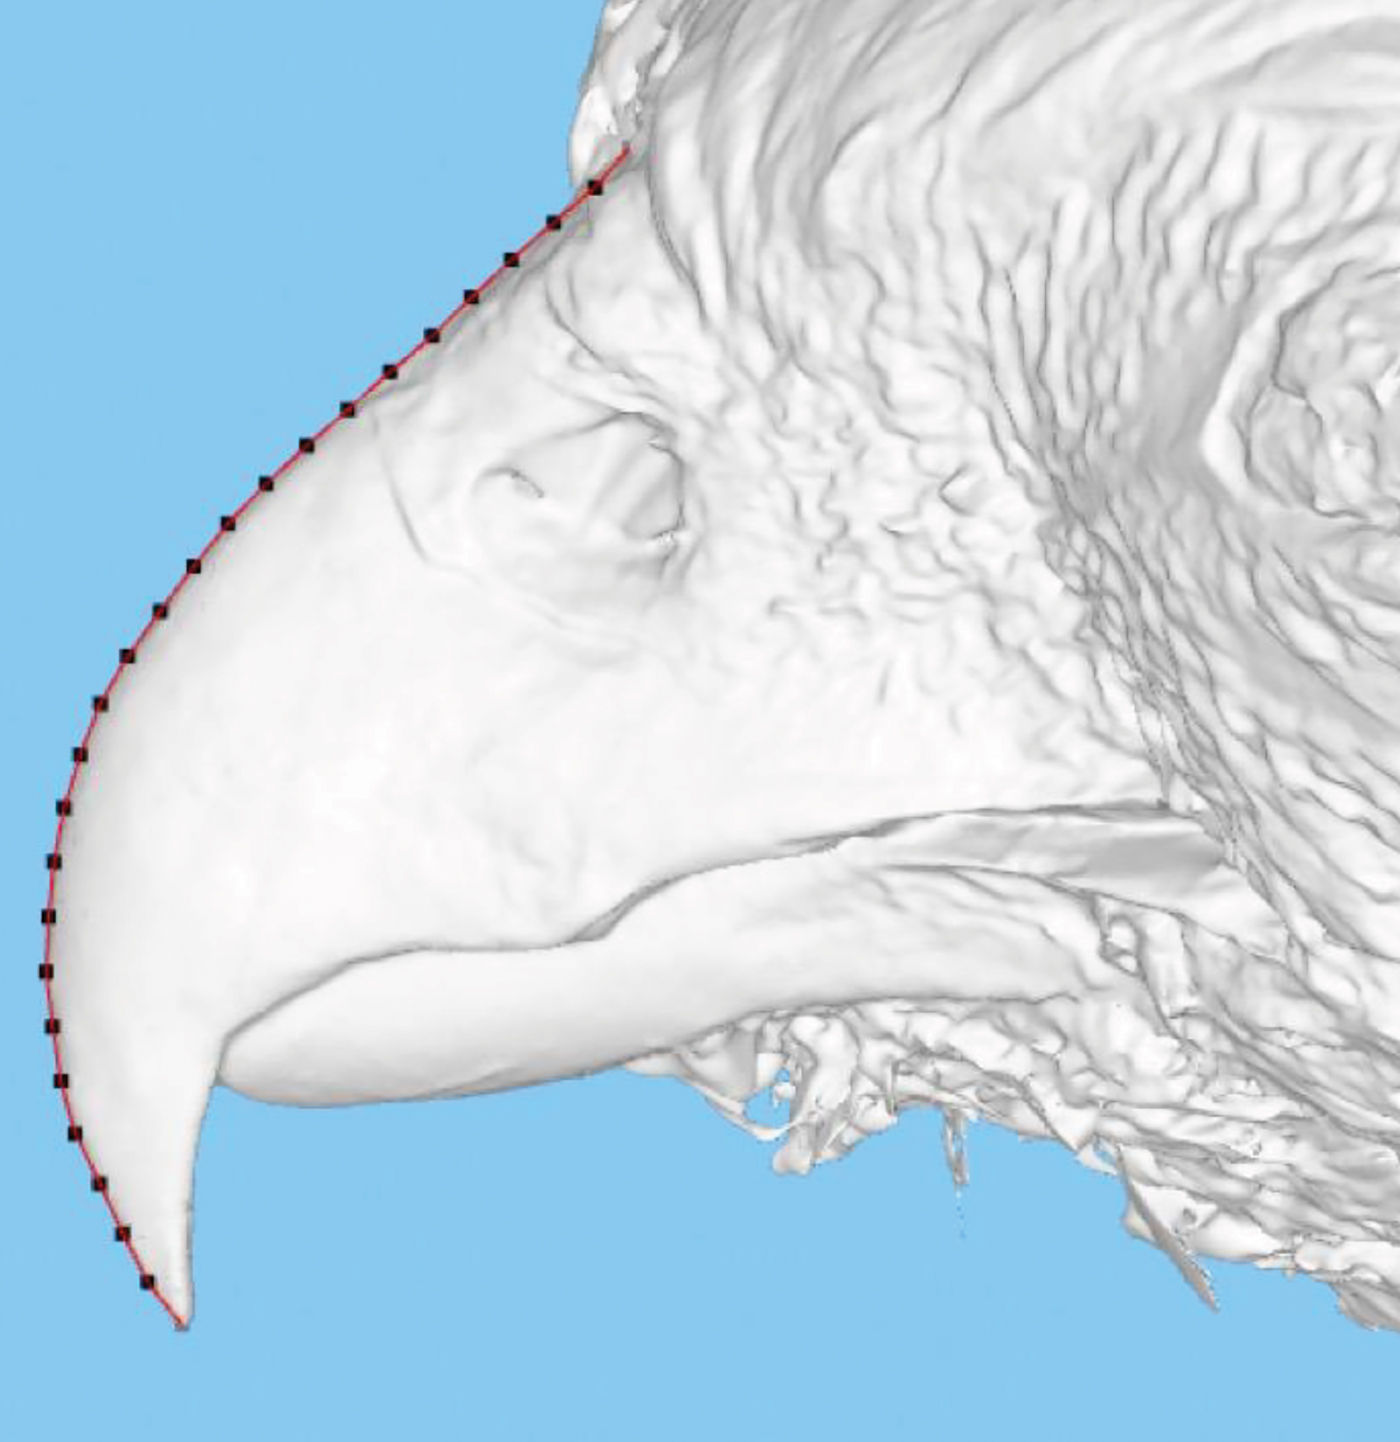 3D image of a bird bill and points along the midline.